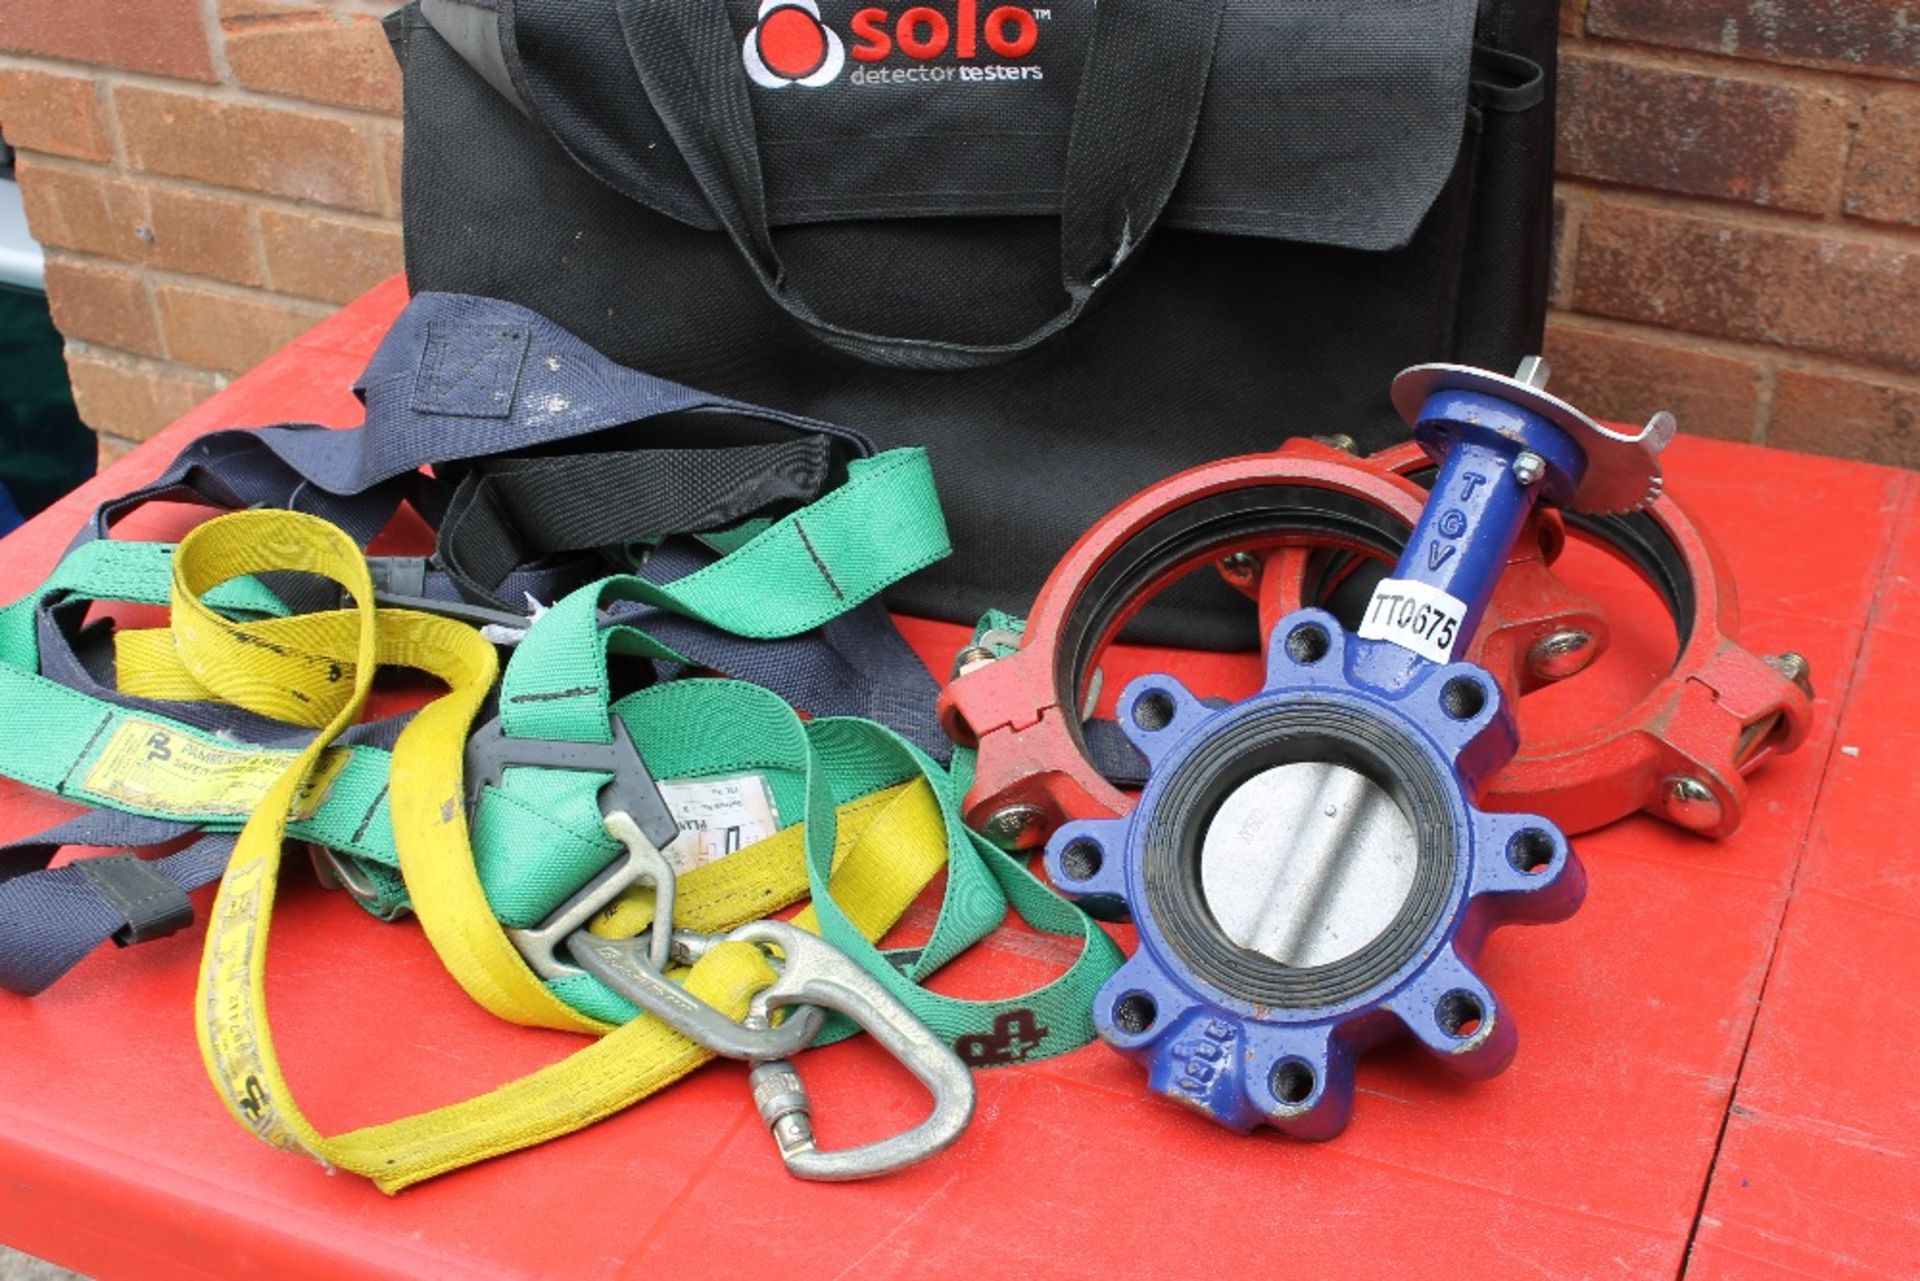 Solo Detector Testers bag with Safety Harness & Clamps - Image 3 of 3